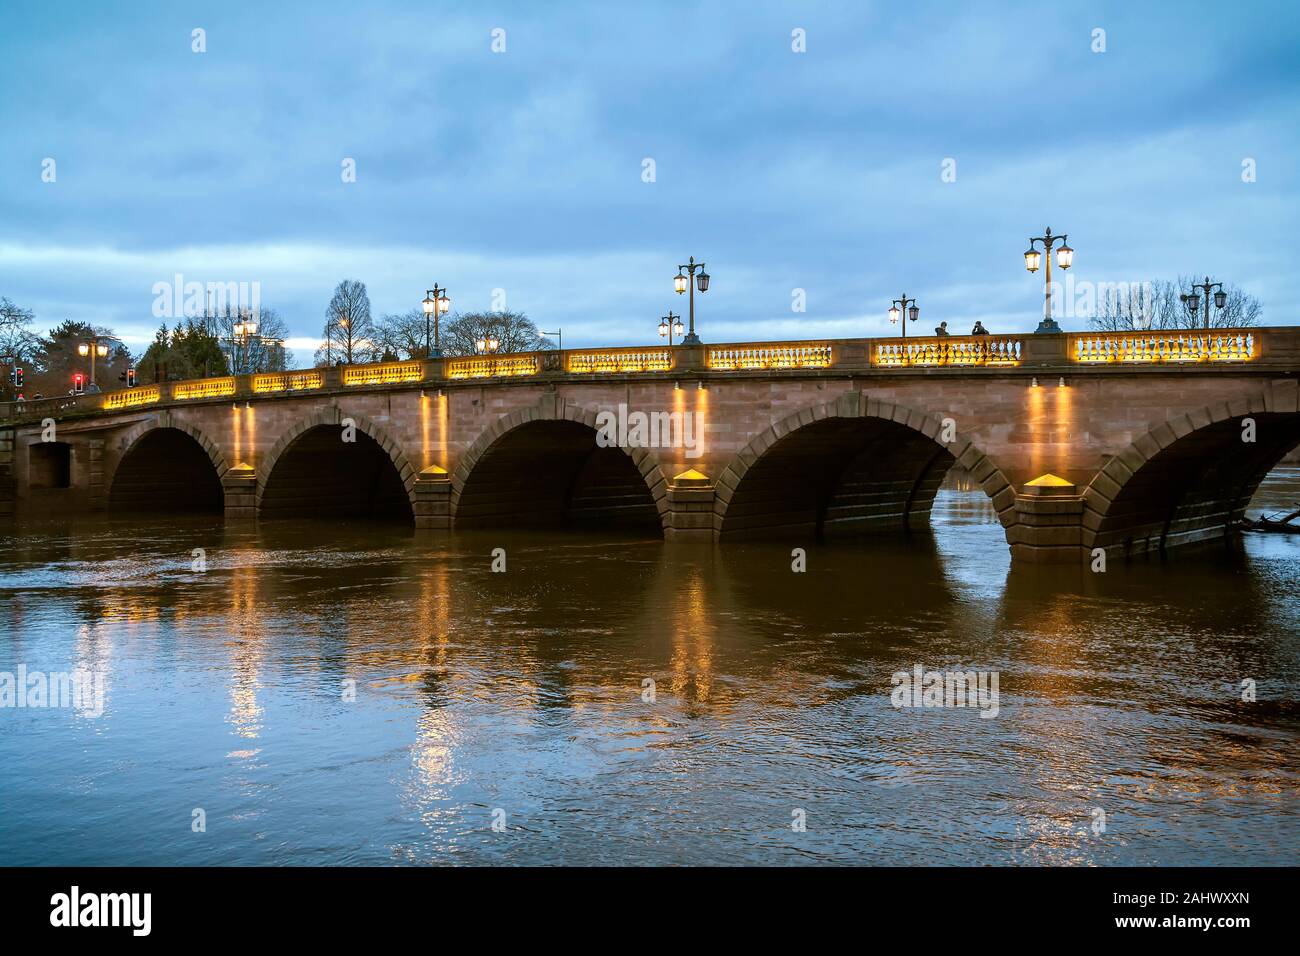 Worcester bridge at dusk. Traditional style lampposts light the magnificent arches of the bridge and reflect in the water of the River Severn below. Stock Photo